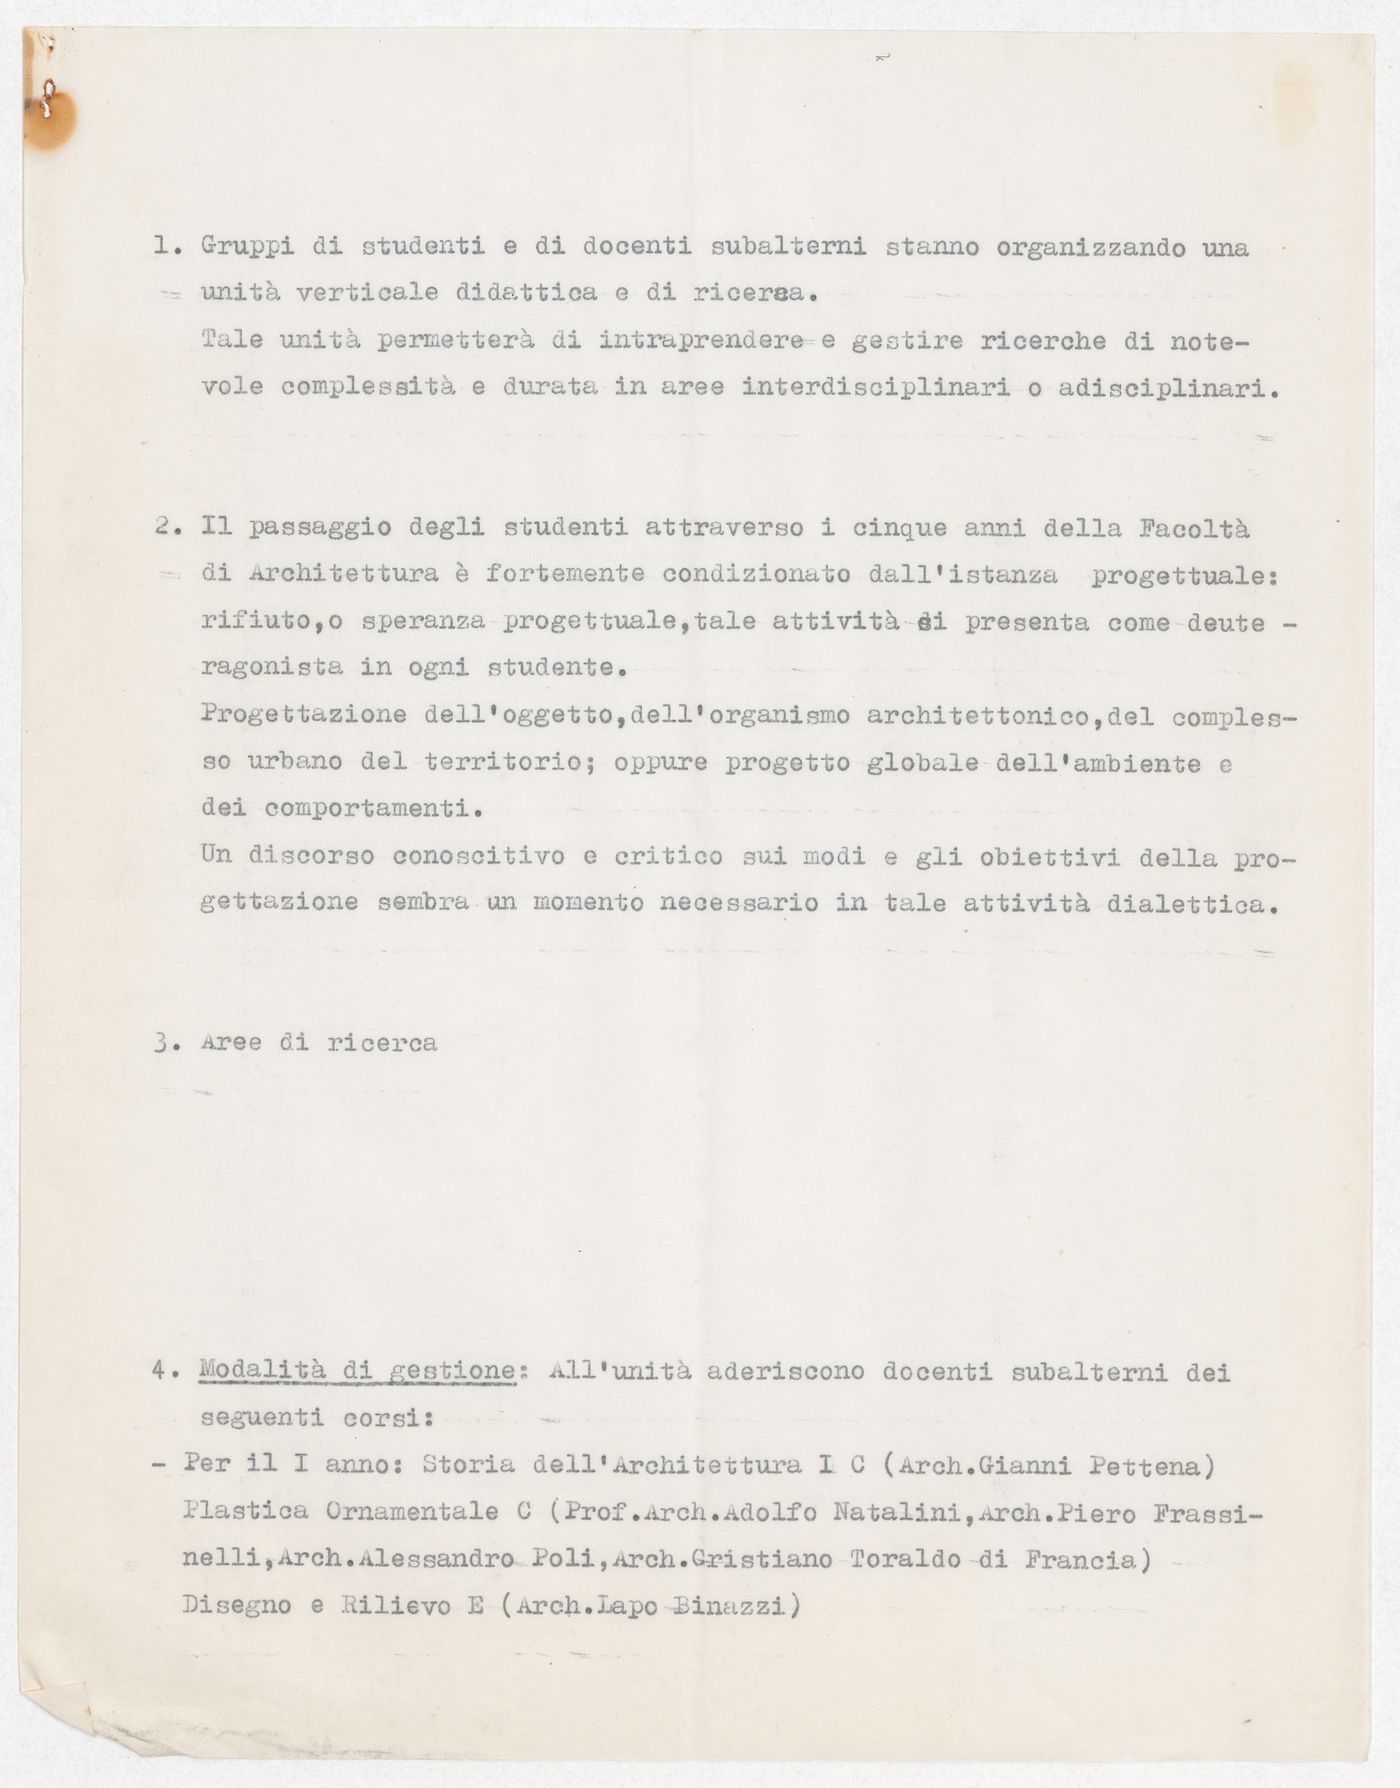 Administrative notes for Pettena teaching at the University of Florence